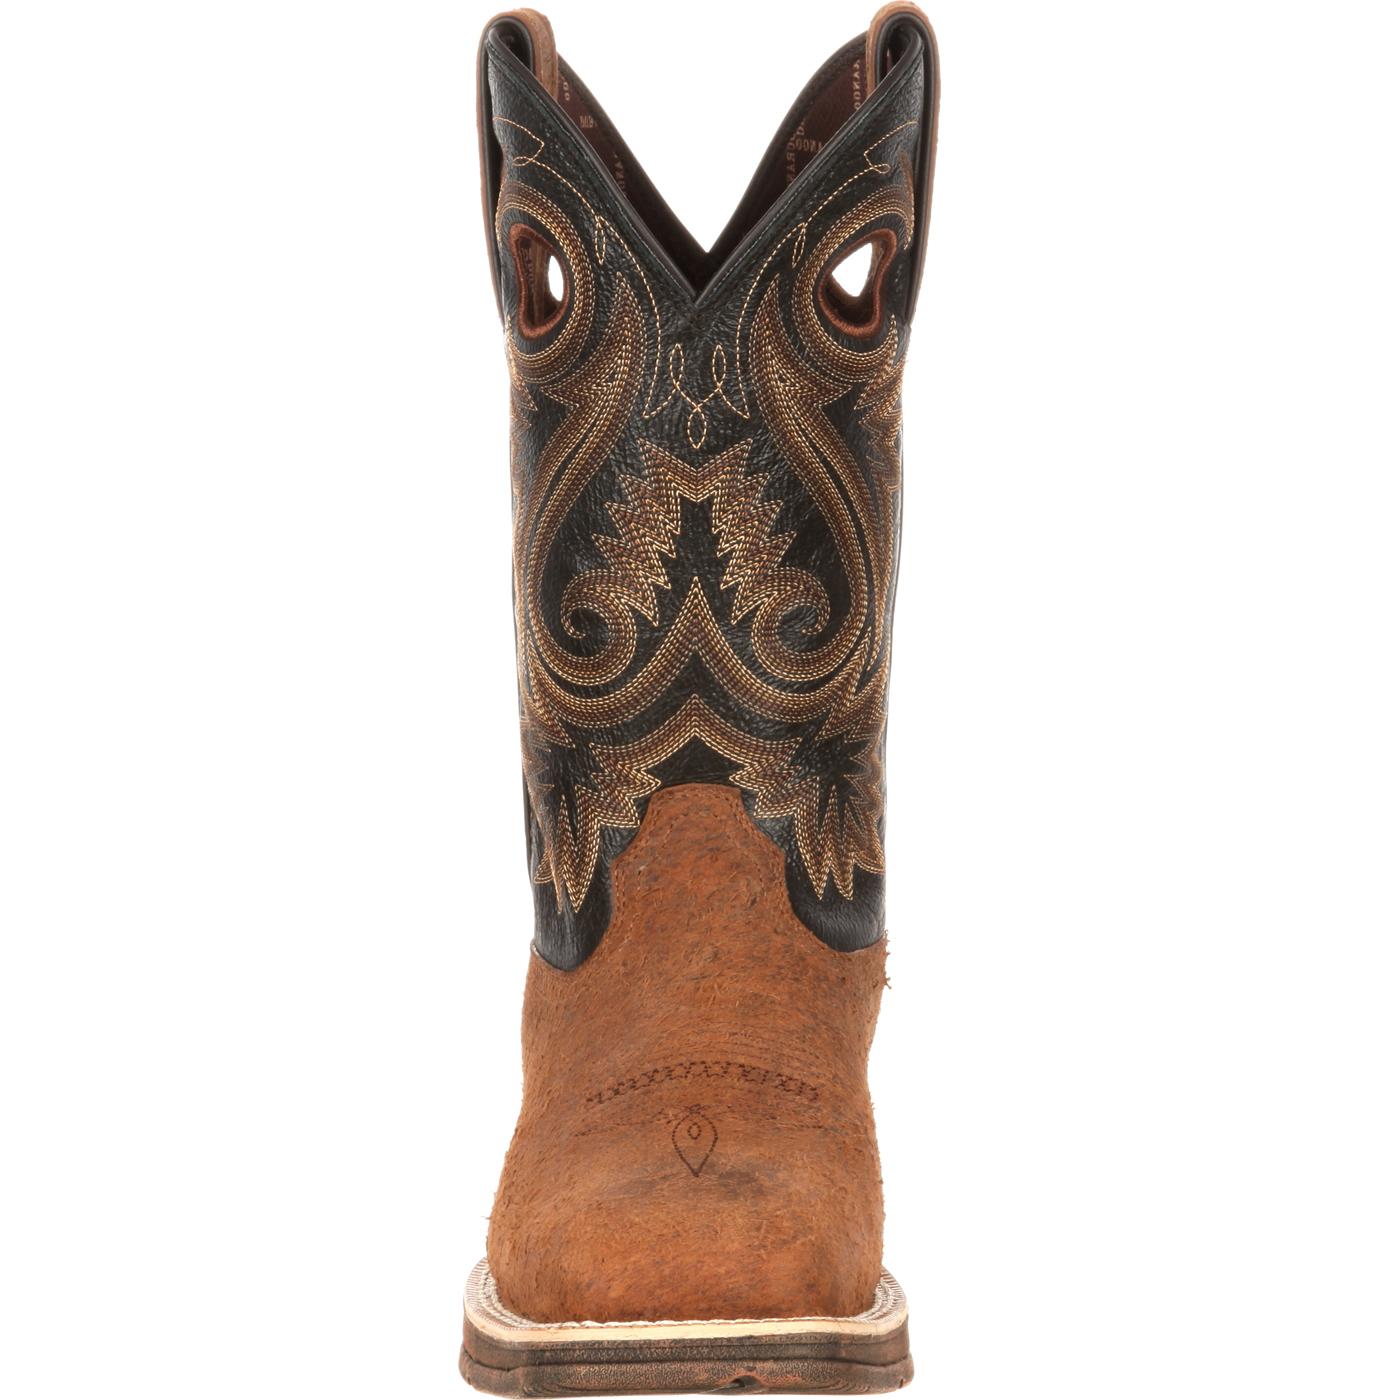 Rebel by Durango: Men's Suede and Leather Western Boots